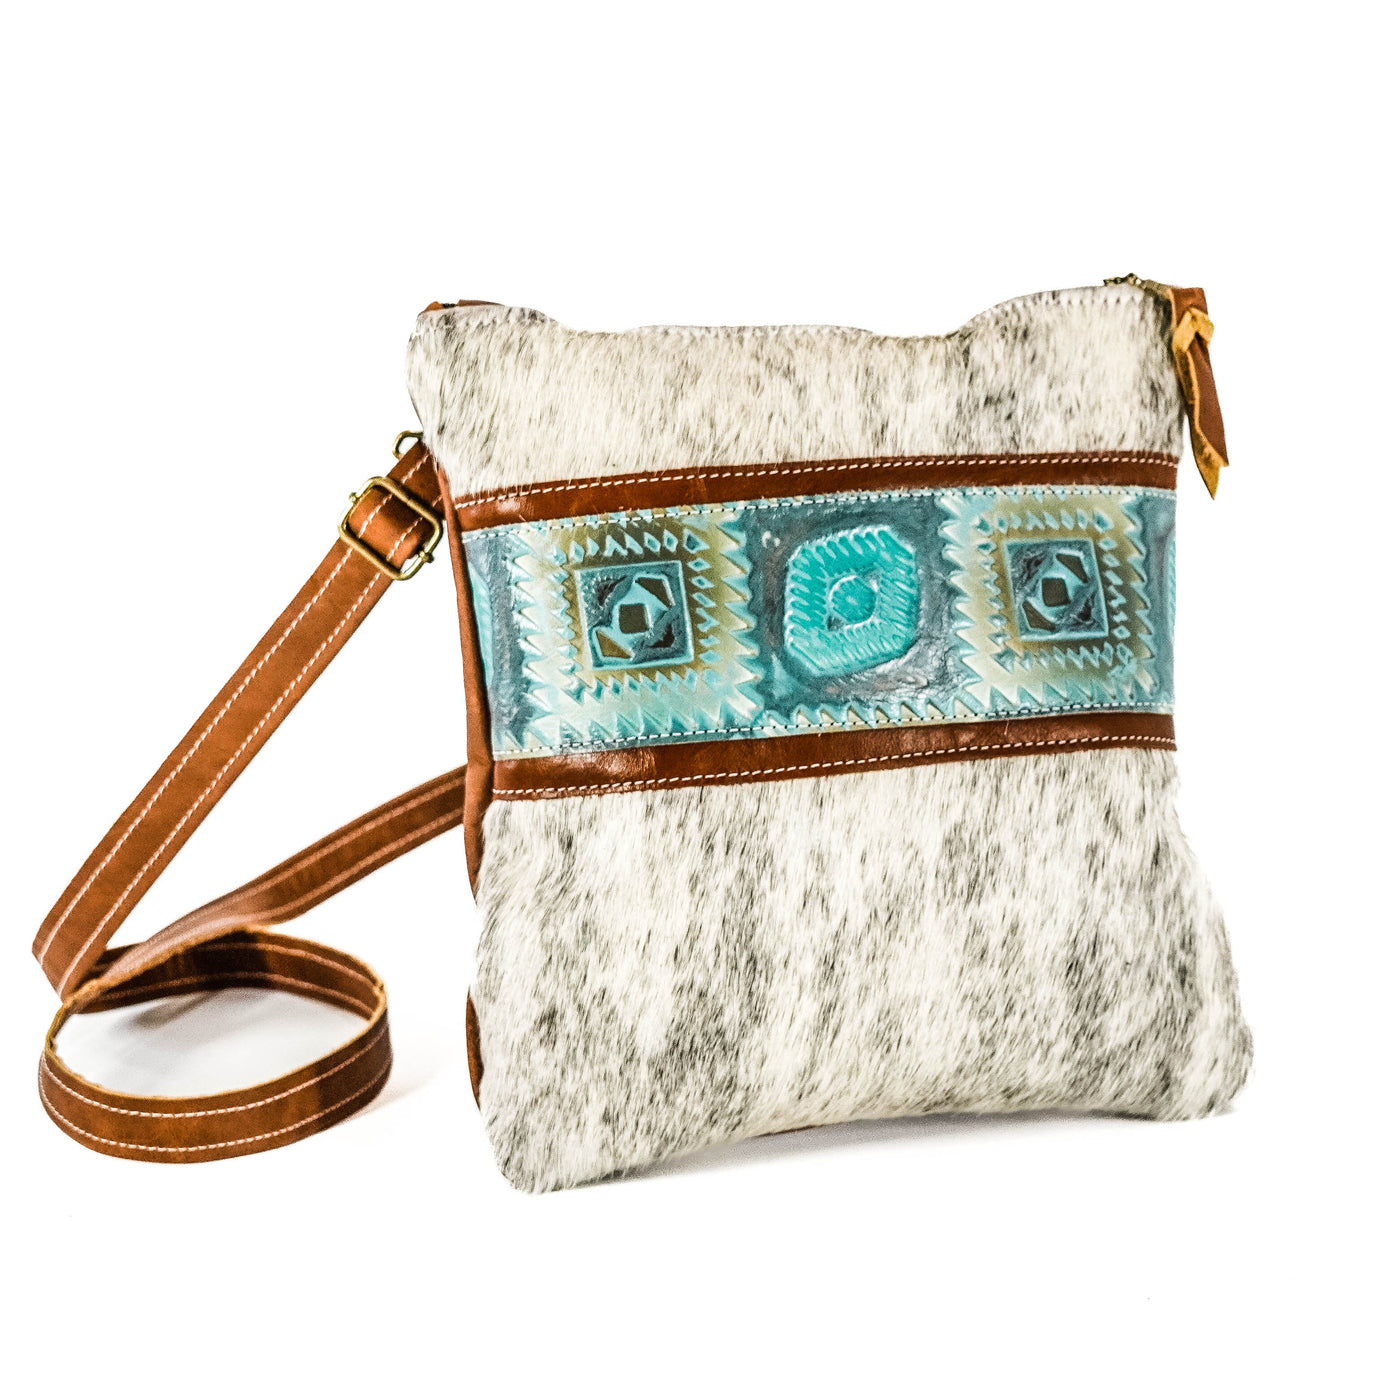 006 Shania - Light Grey Brindle w/ Canyon Aztec-Shania-Western-Cowhide-Bags-Handmade-Products-Gifts-Dancing Cactus Designs